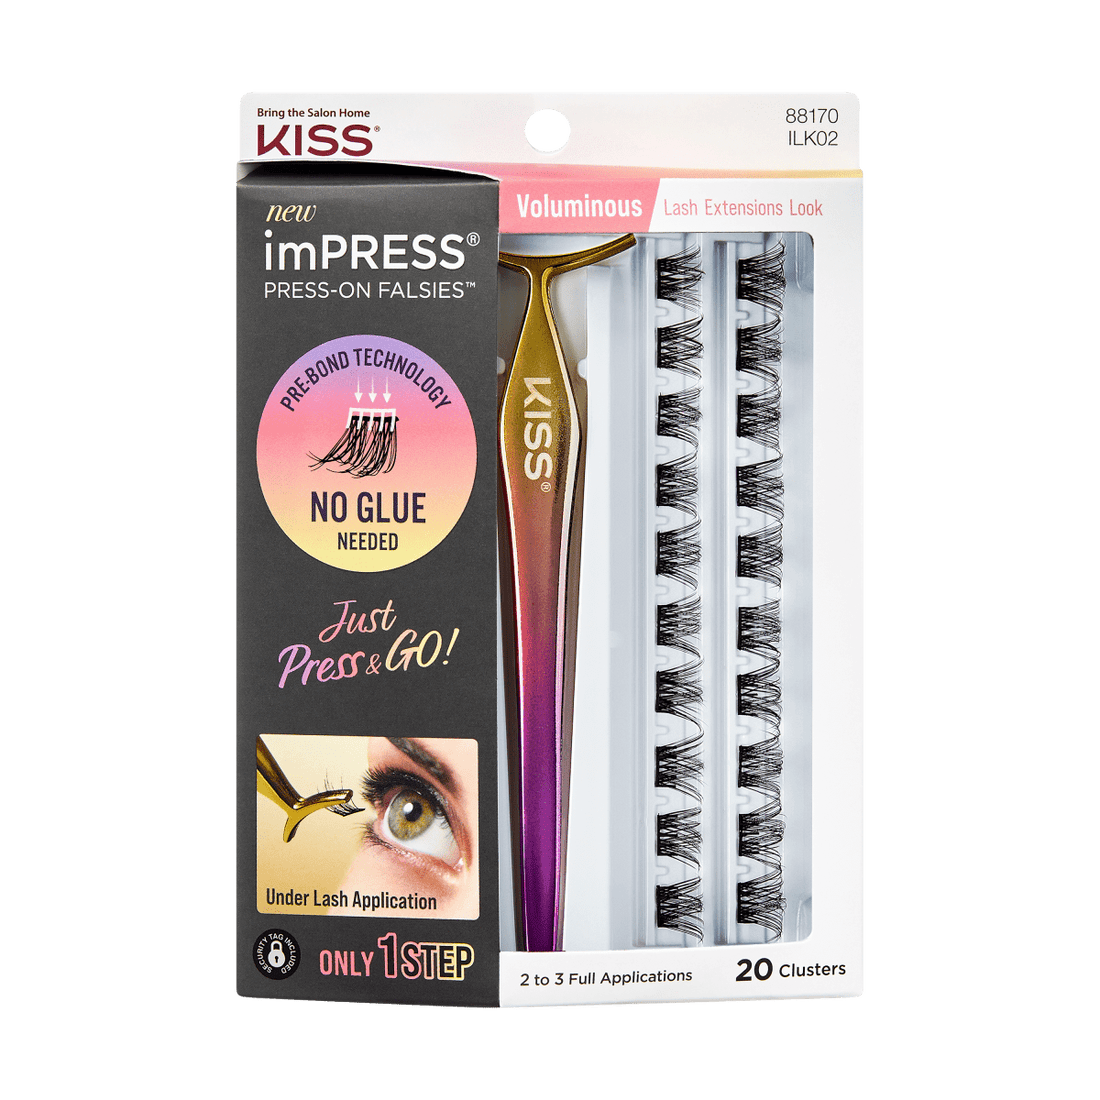 This packaging contains a set of imPRESS Beauty Falsies press on lashes kit for easy application with no glue needed.